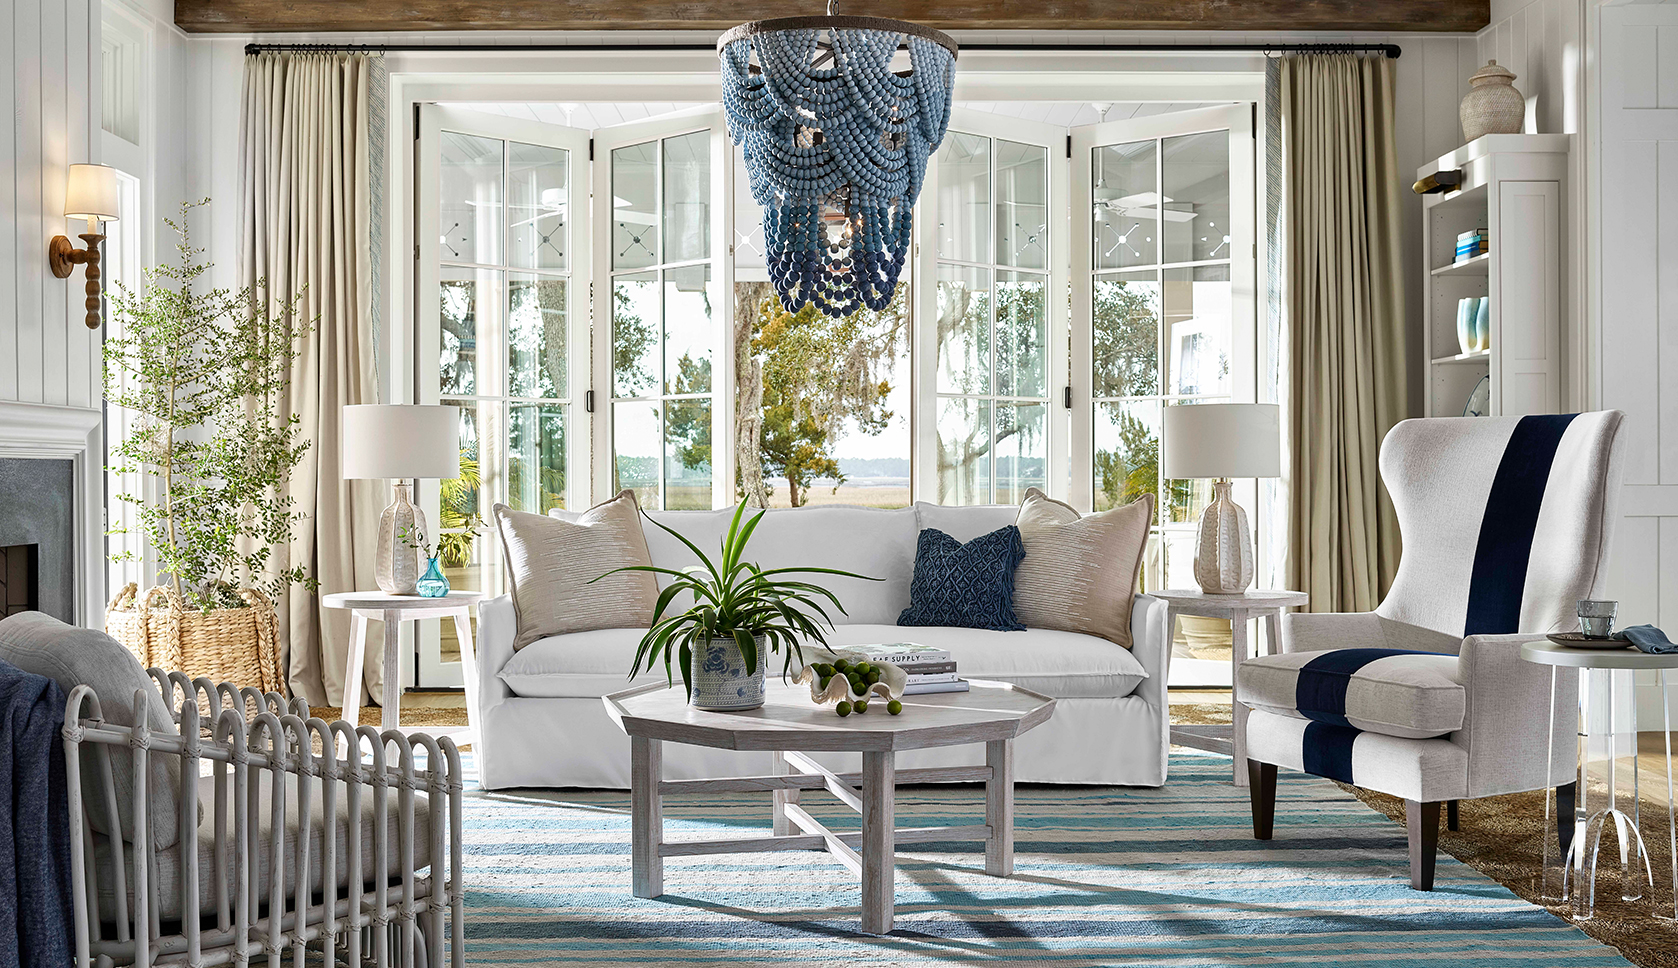 Amazing Coastal Accent with Chandeliers